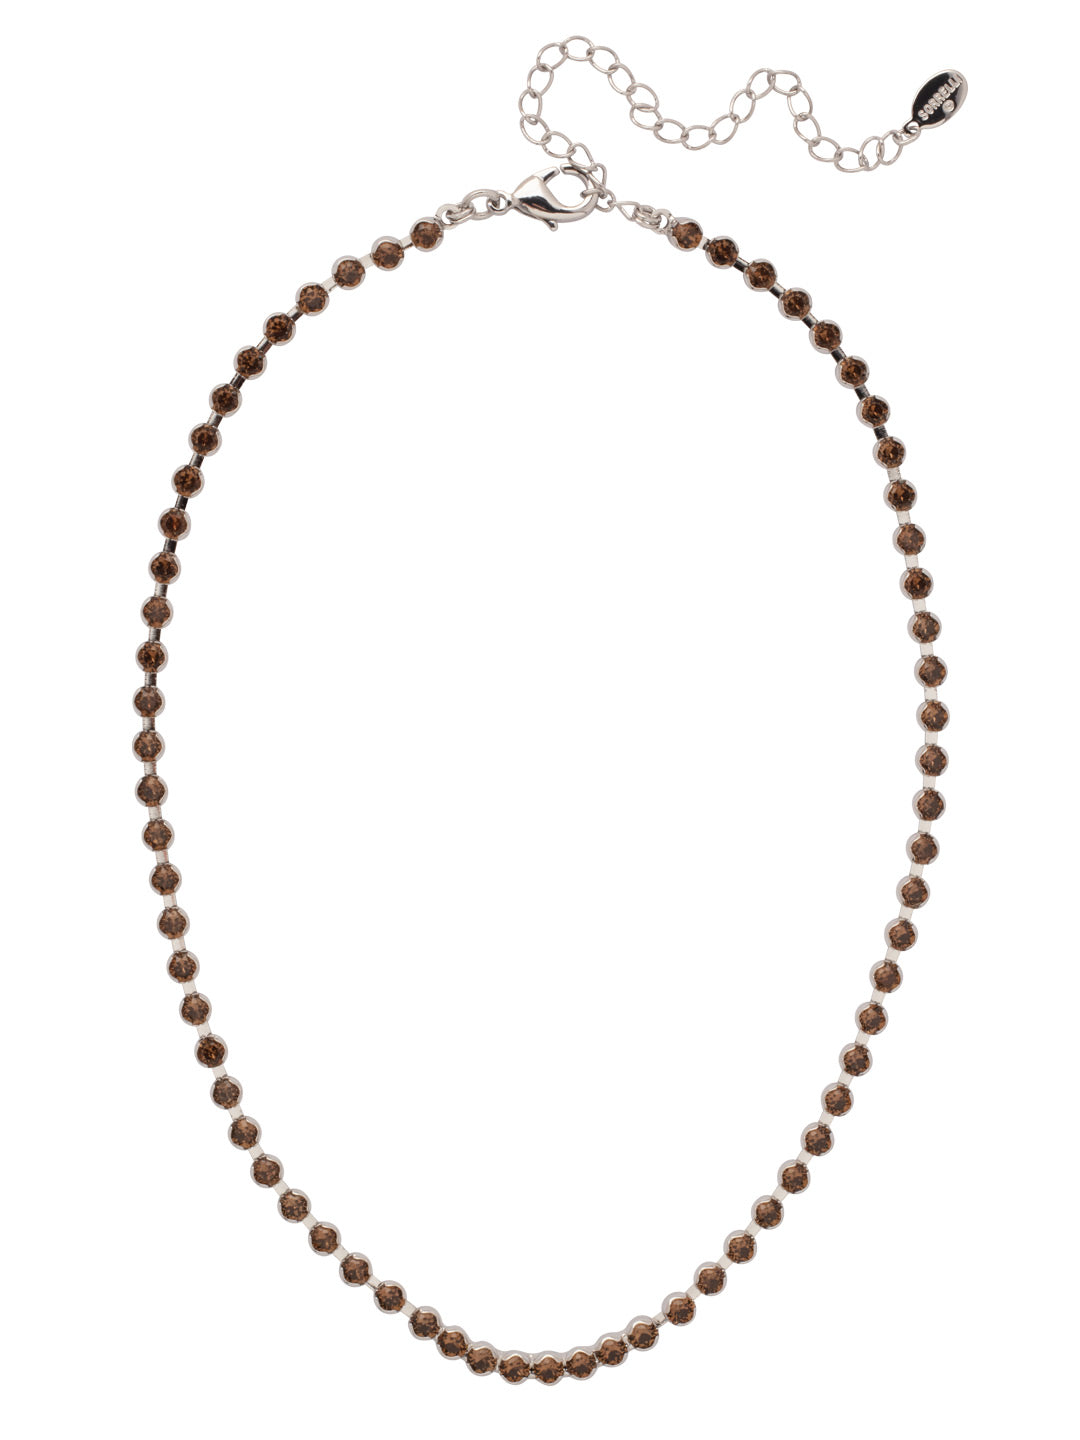 Marnie Tennis Necklace - NFA2PDASP - <p>Perfect for dressing up or down, the classic Marnie Tennis Necklace features a repeating line of crystals secured by a lobster claw clasp. From Sorrelli's Aspen SKY collection in our Palladium finish.</p>